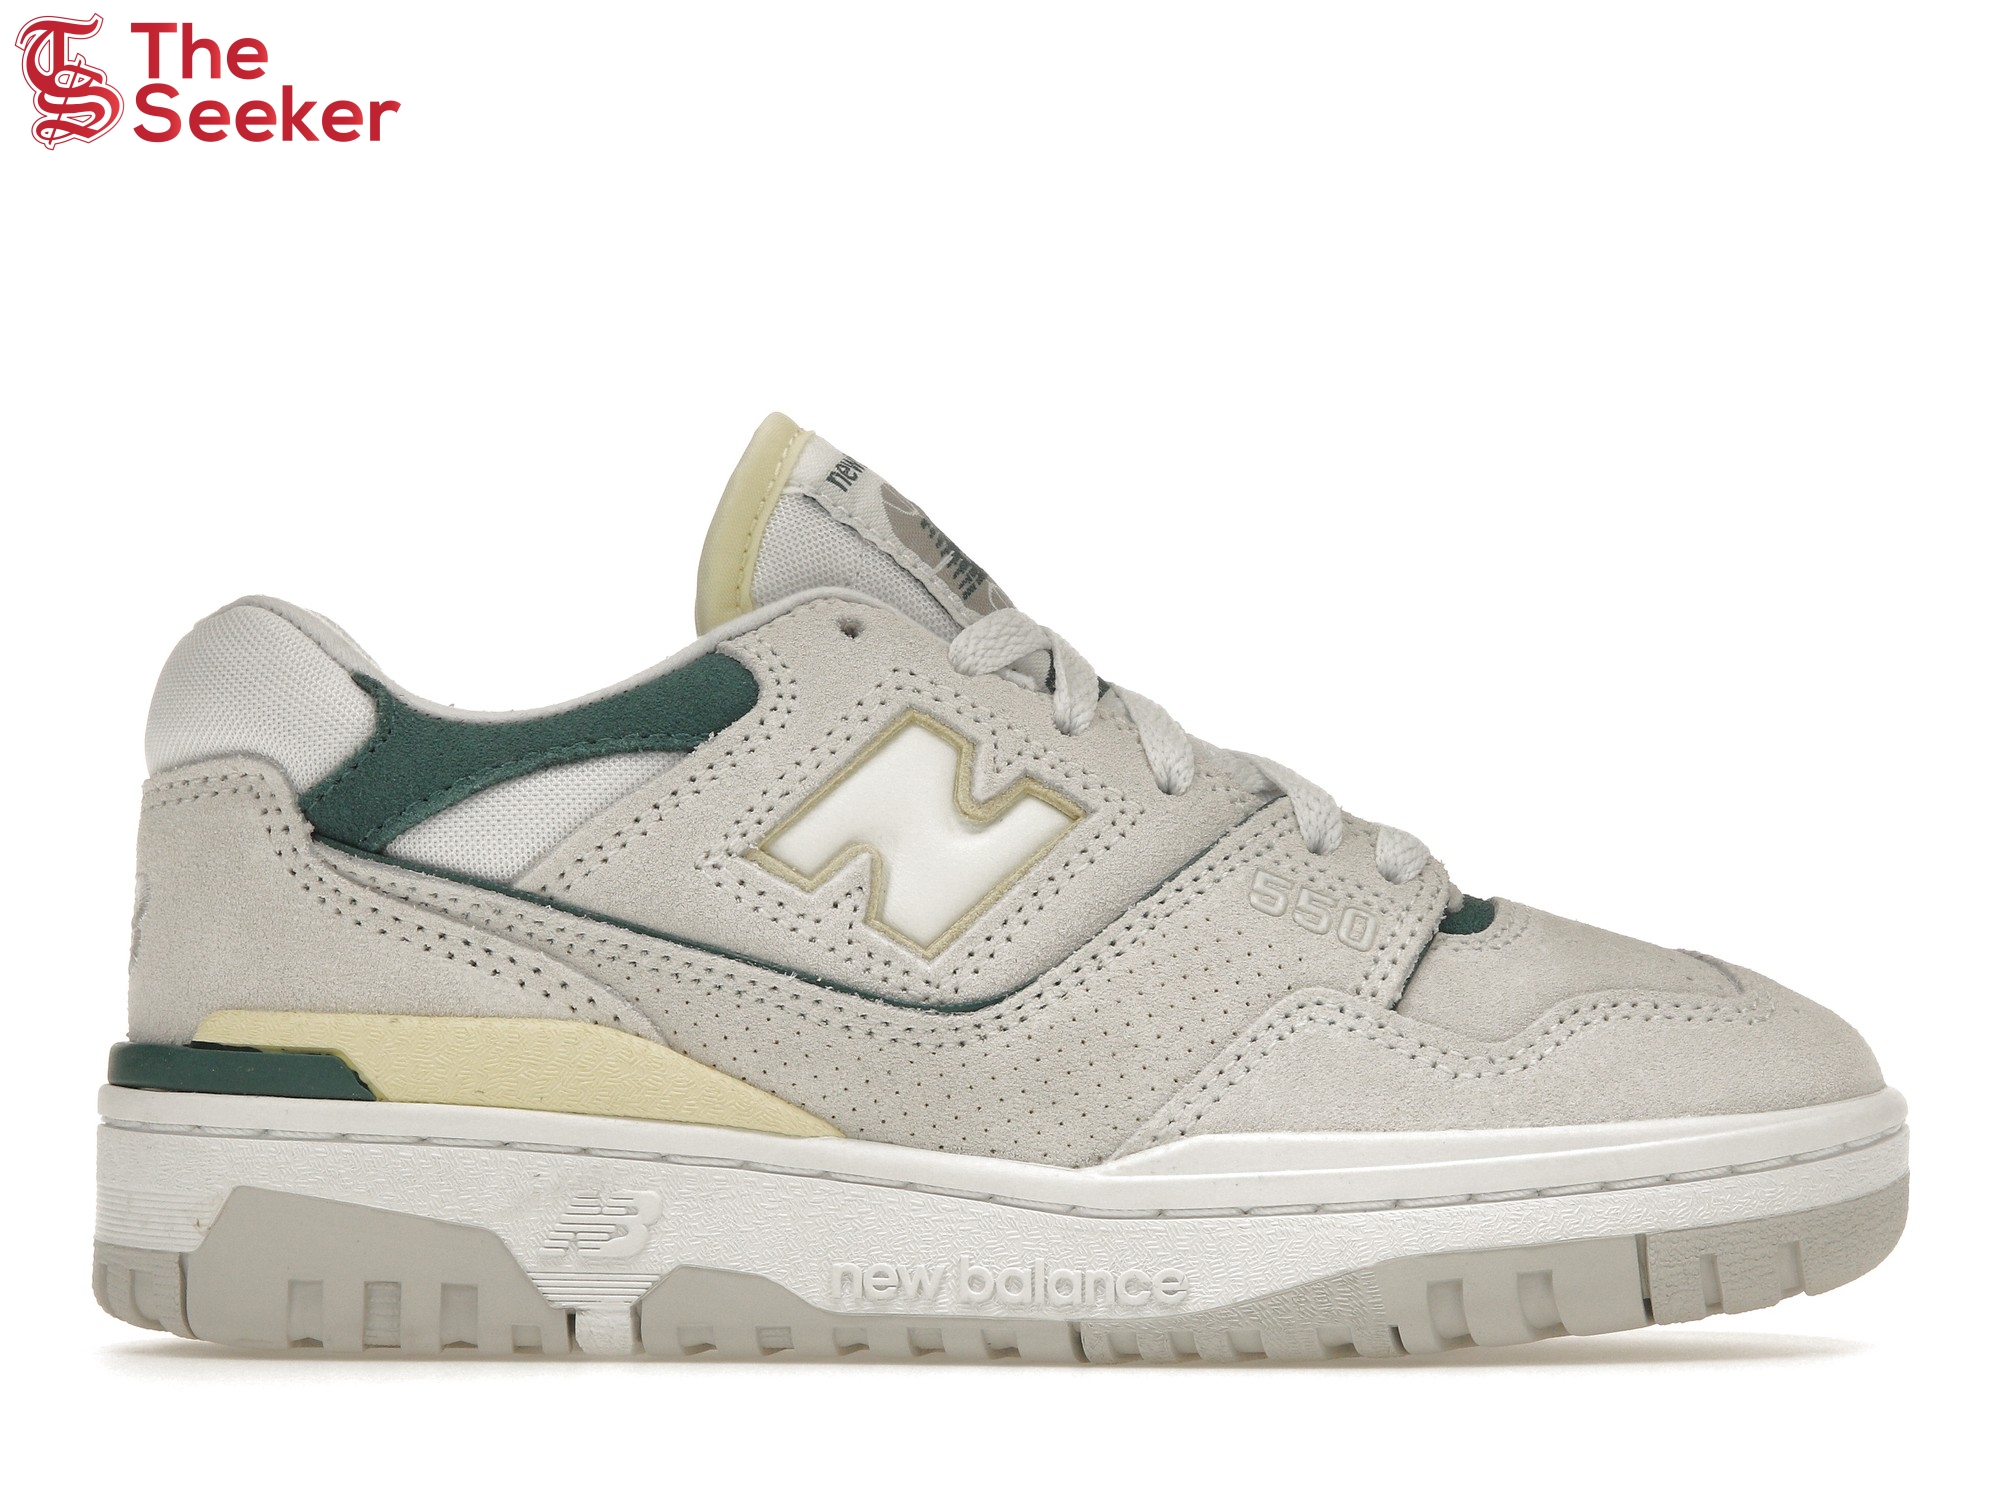 New Balance 550 Reflection Vintage Teal (Women's)